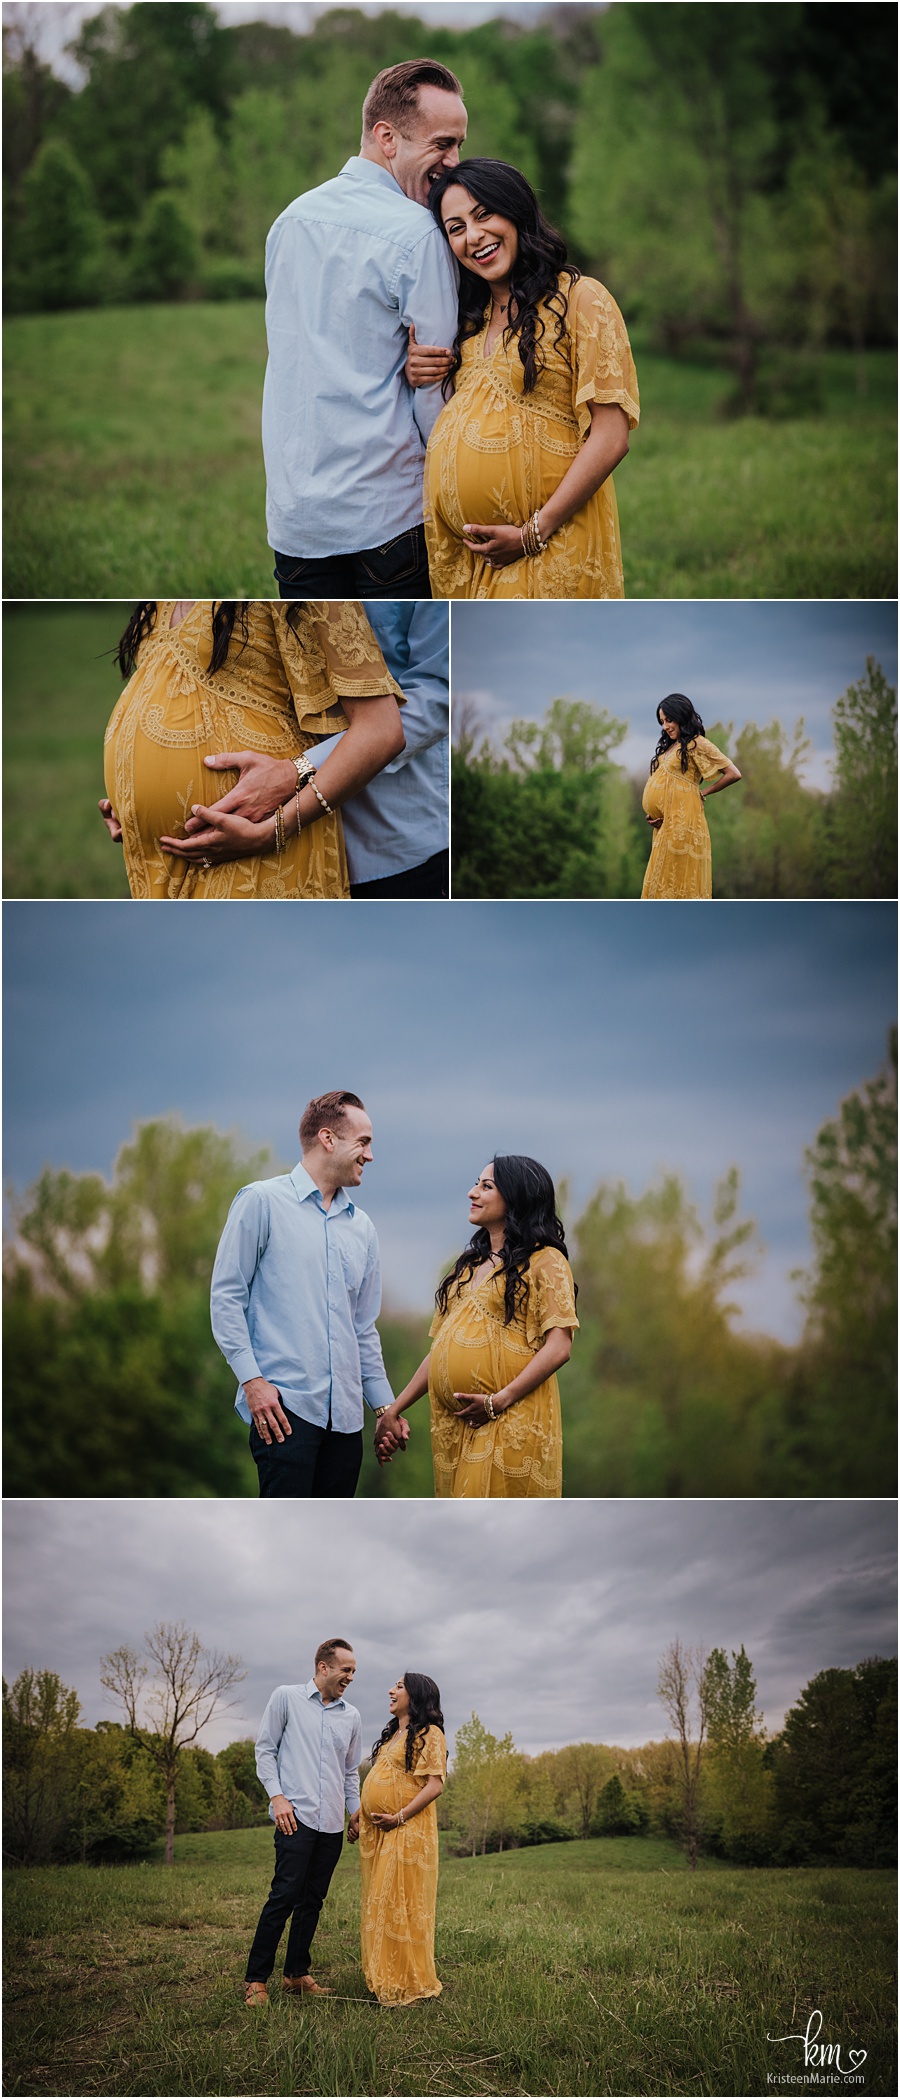 maternity photography - mustard materntiy dress with husband in blue